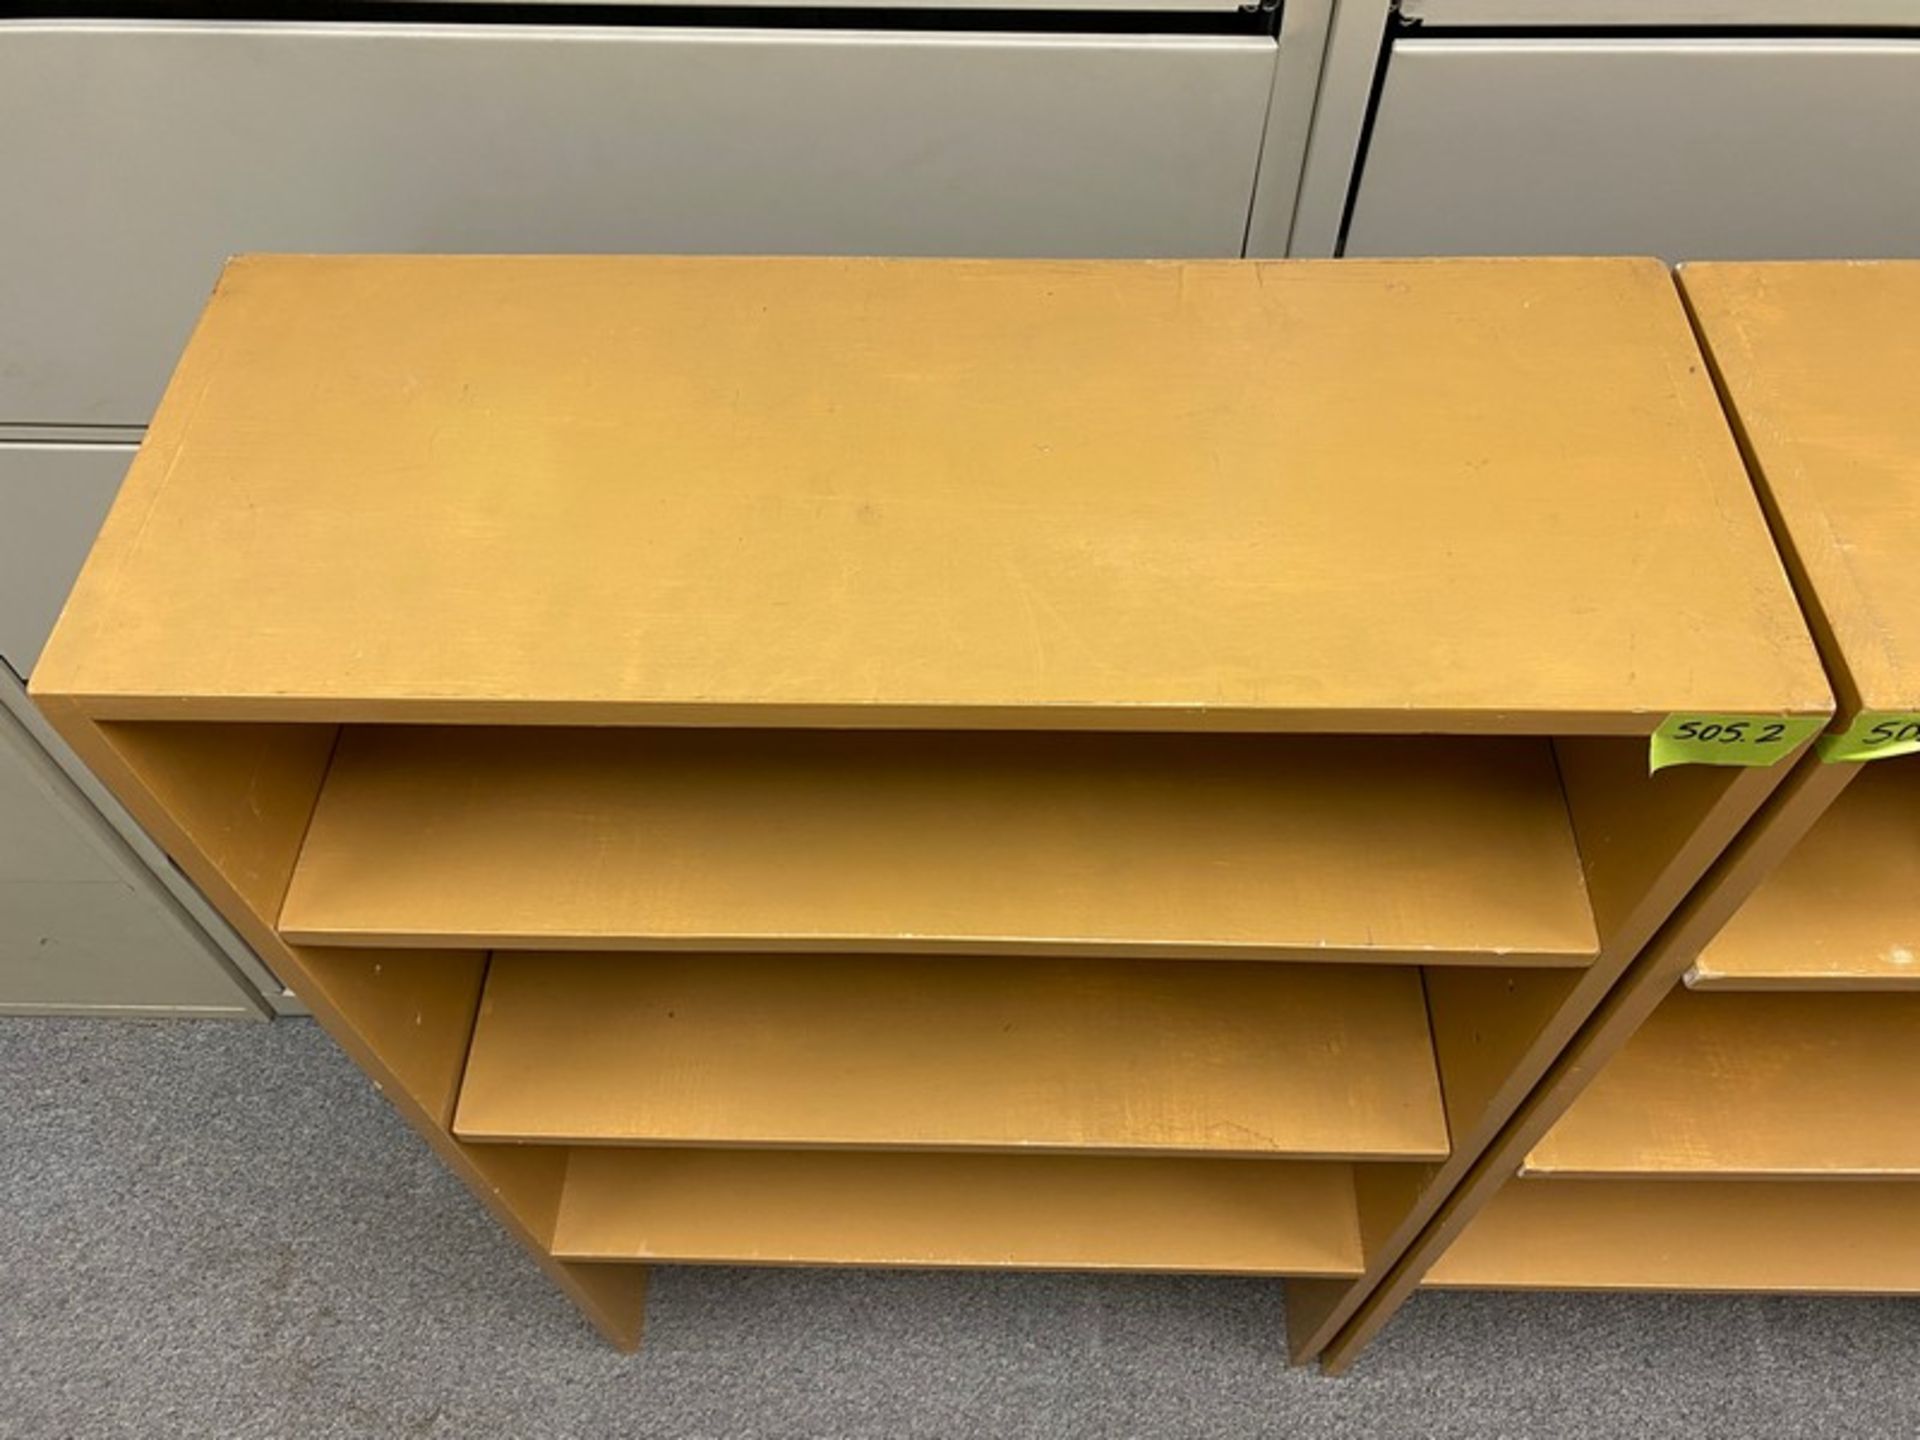 2 matching, painted wooden shelves. 29.5"Wx11.5"Dx48"H (Elevator Handling Fee $20) (Located New - Image 2 of 9